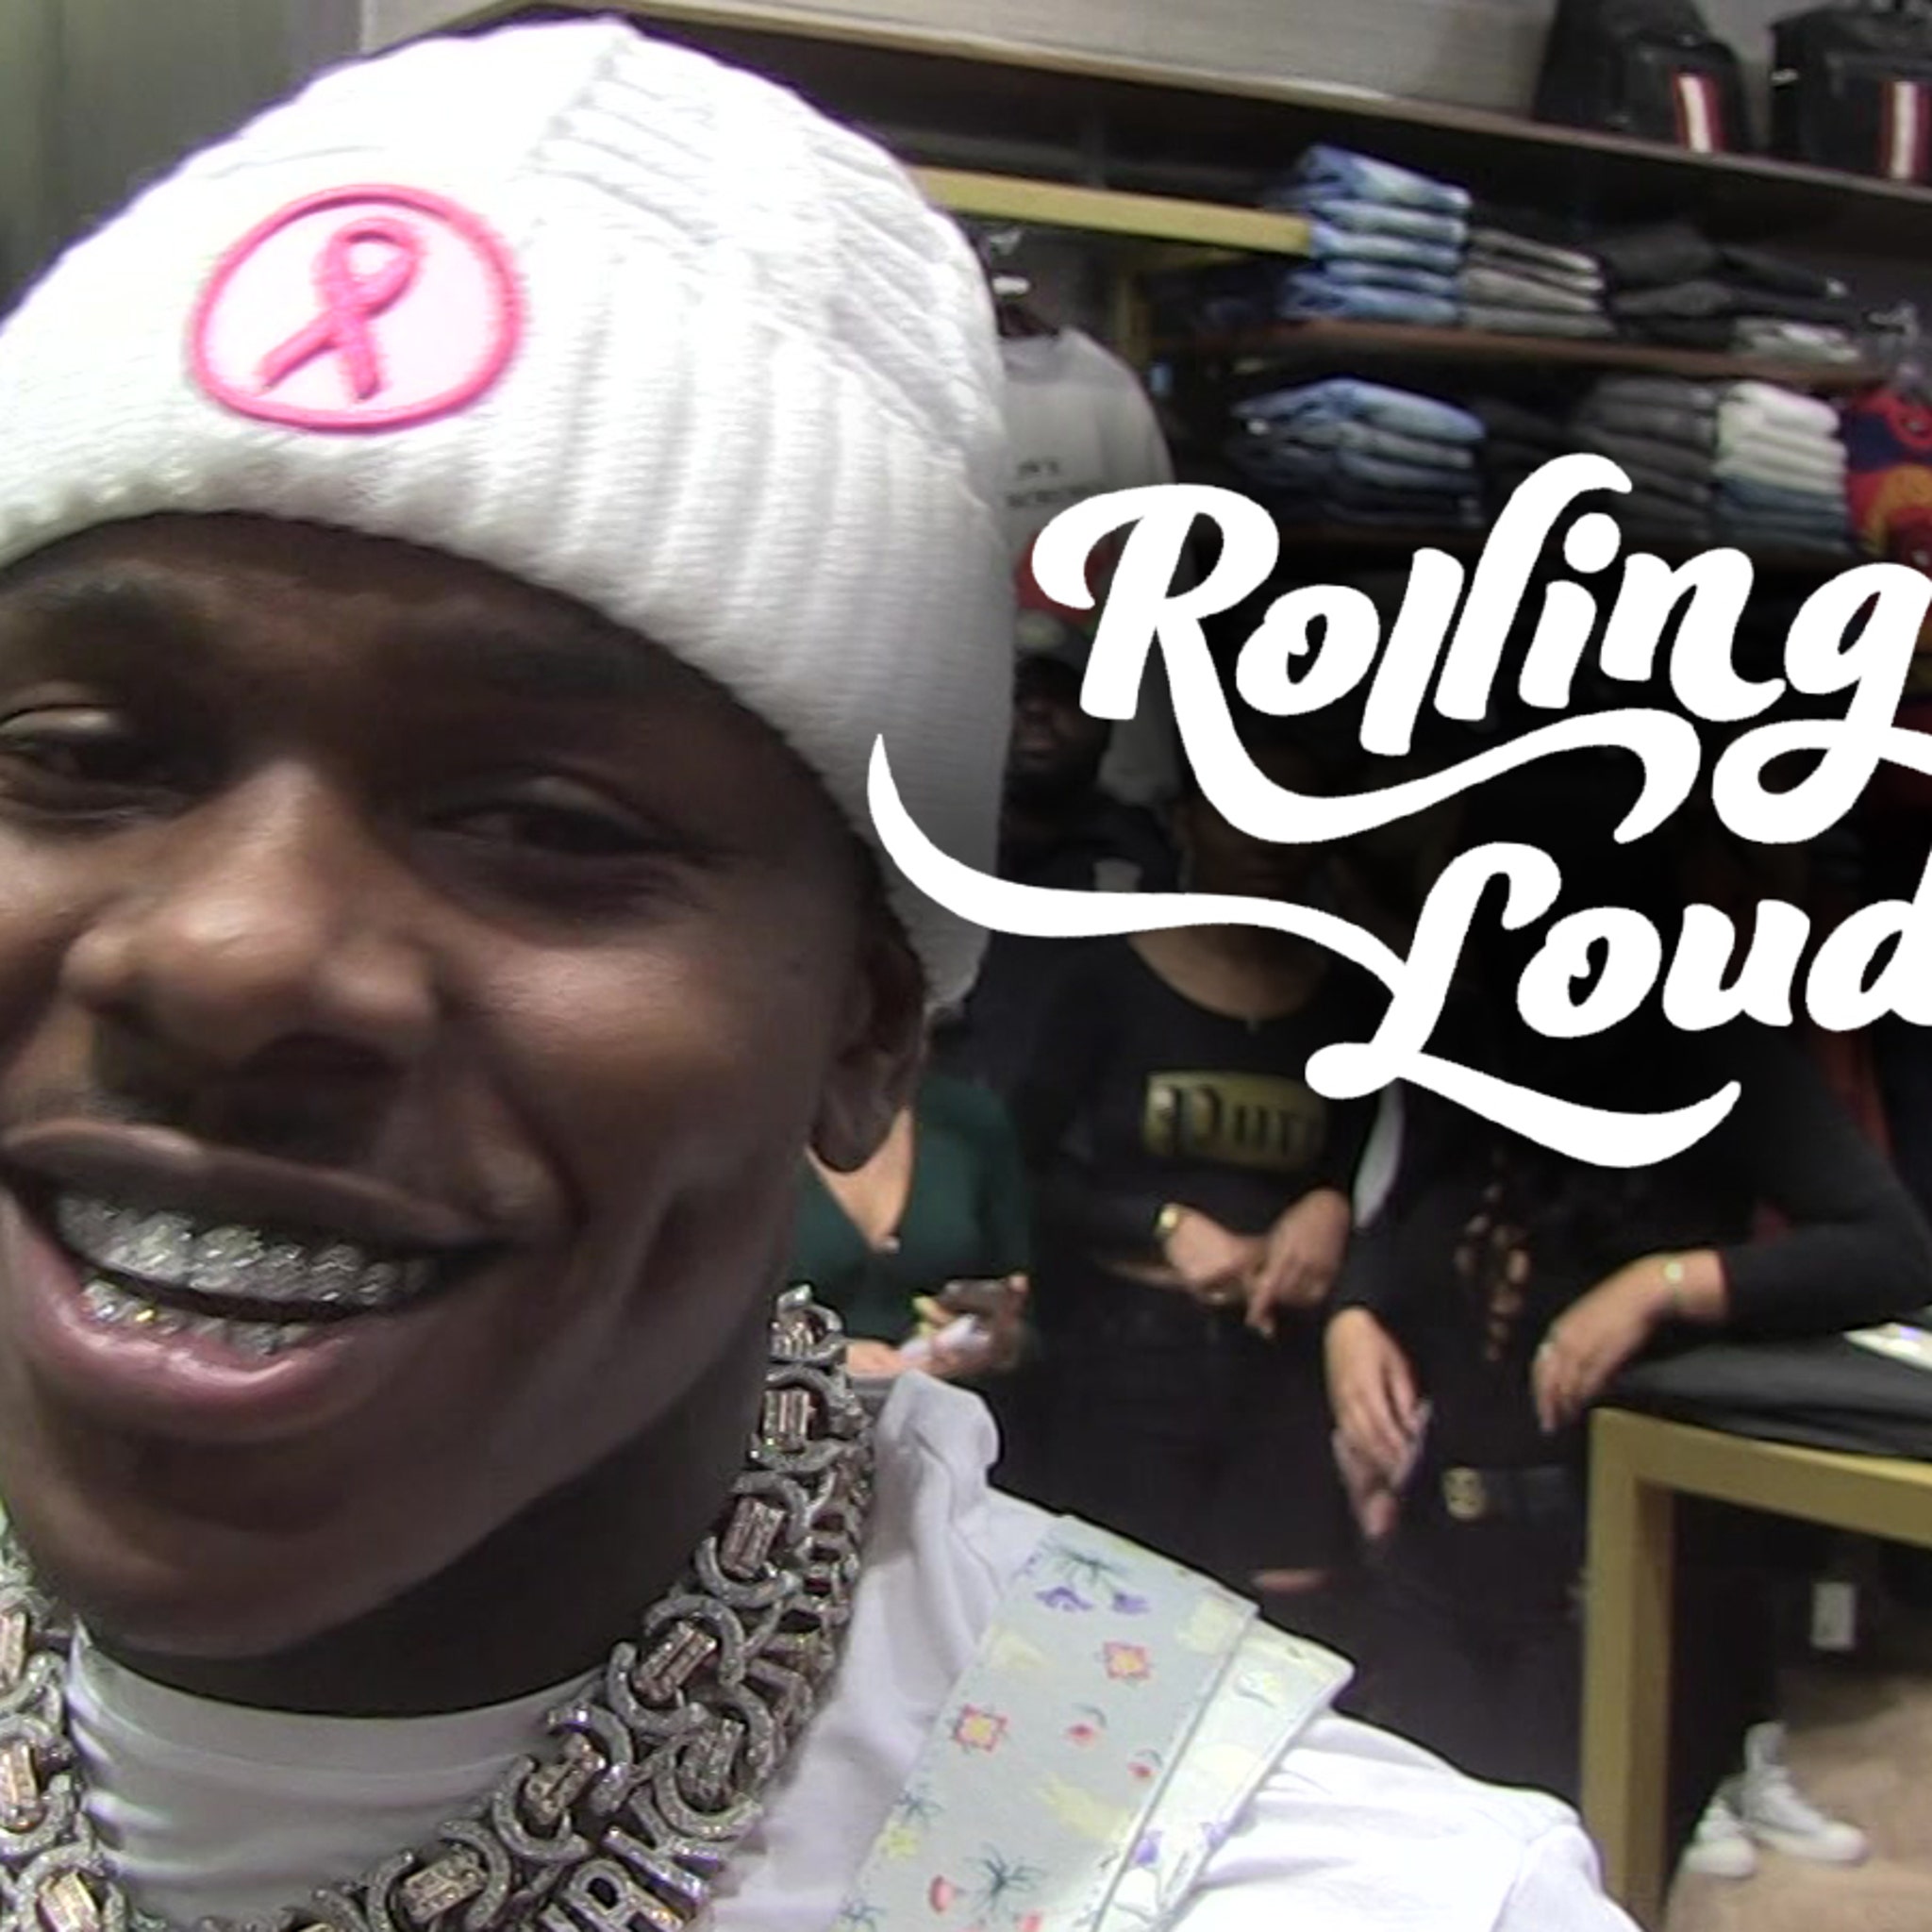 Rolling Loud Says DaBaby Learned From Homophobic Comments, Sponsors New Tour